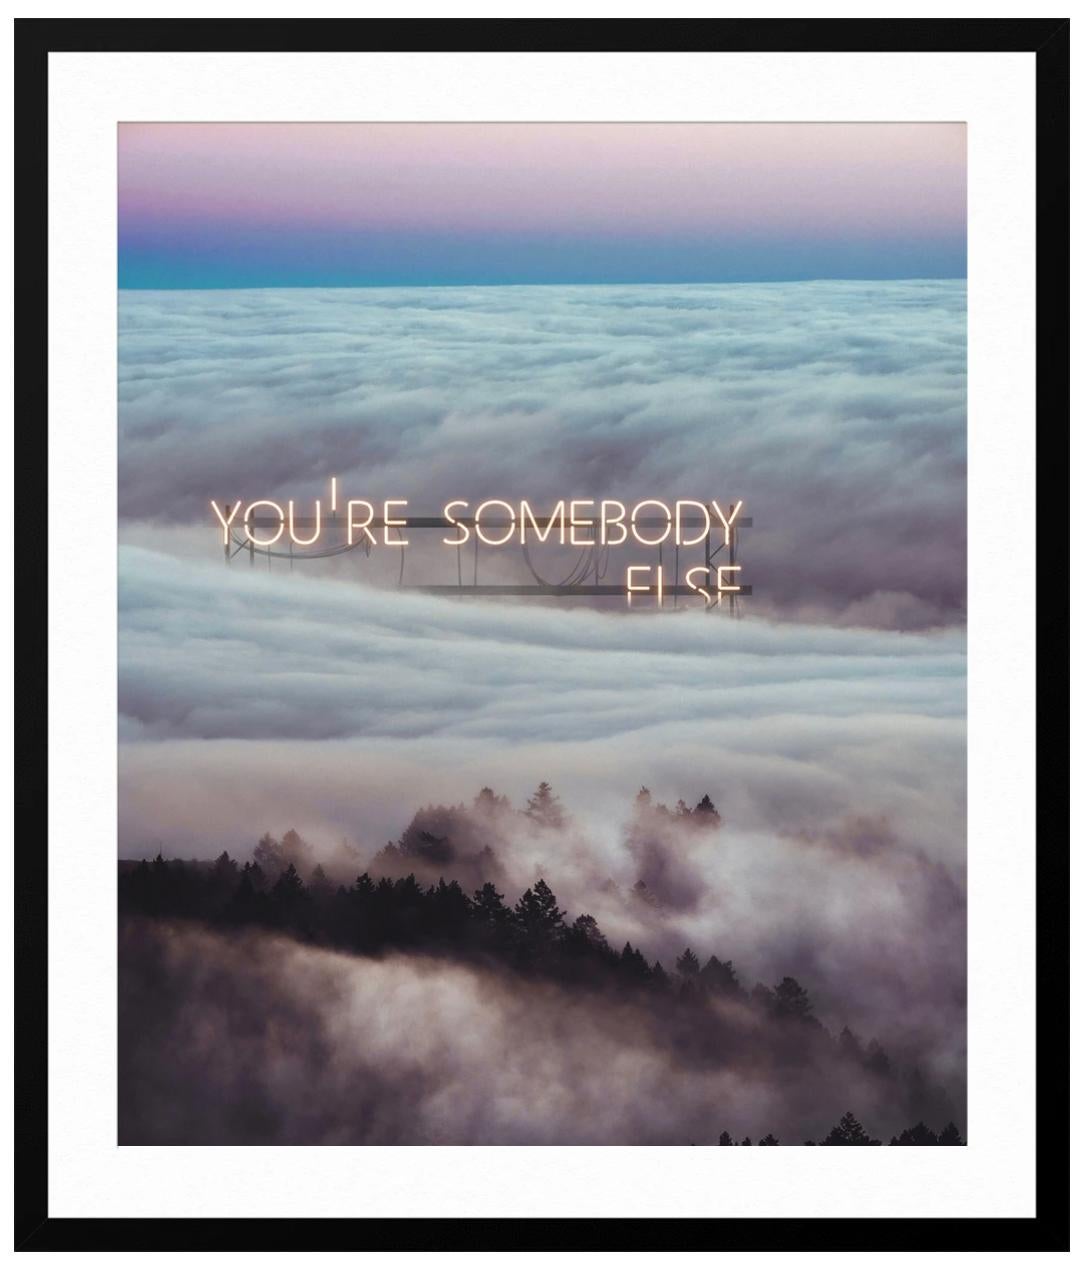 You're Somebody Else - Gray Landscape Photograph by Tom Fabia